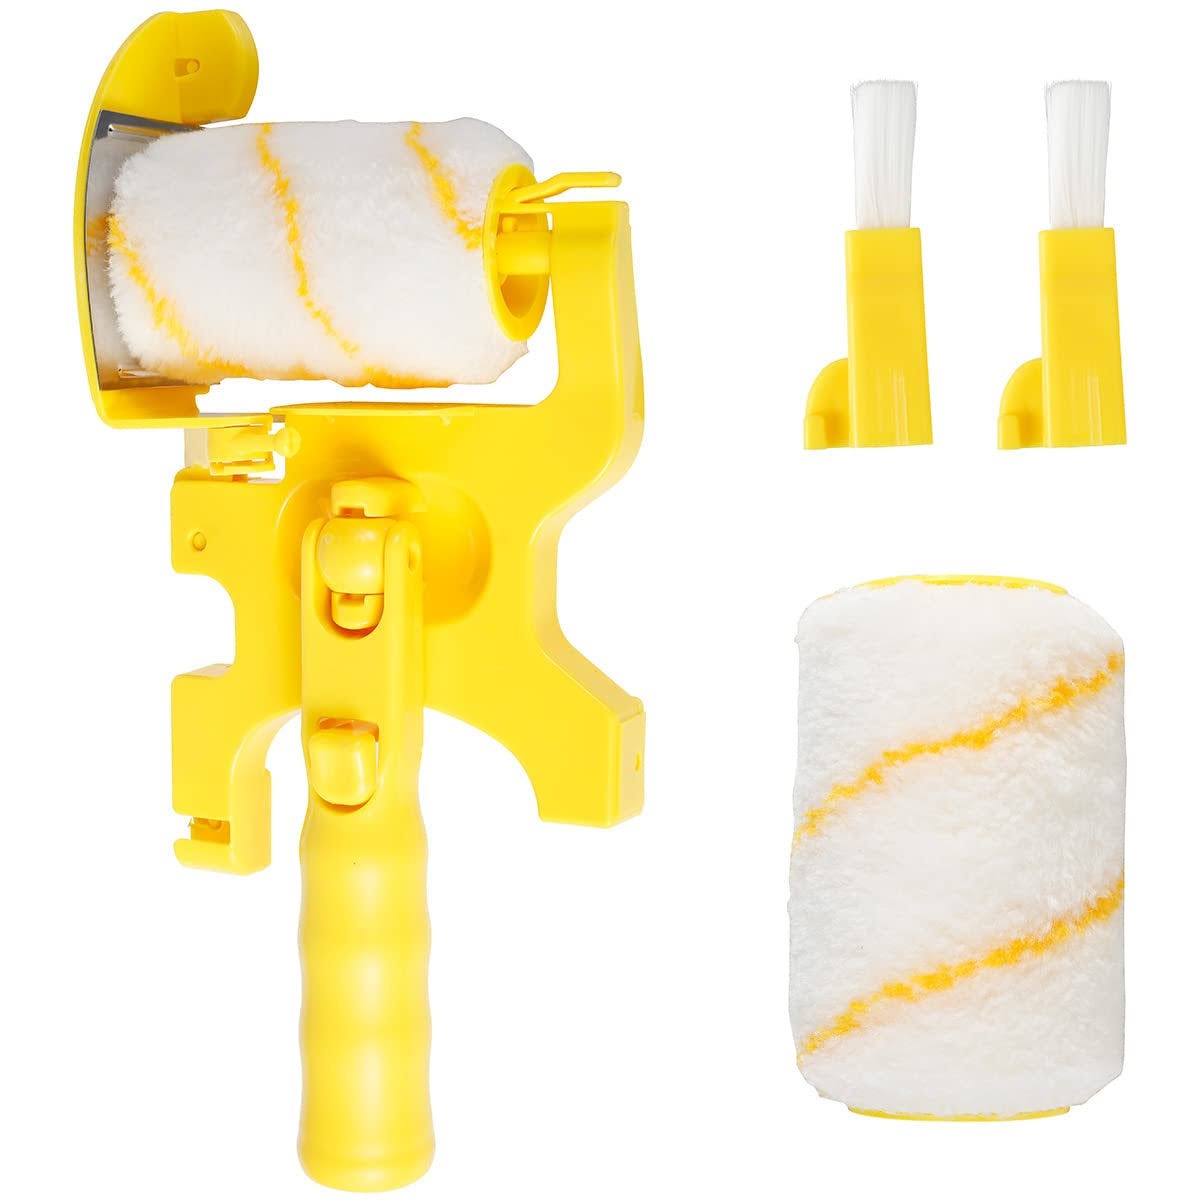 Adjustable Paint Edger Roller for Easy Interior Painting | Image